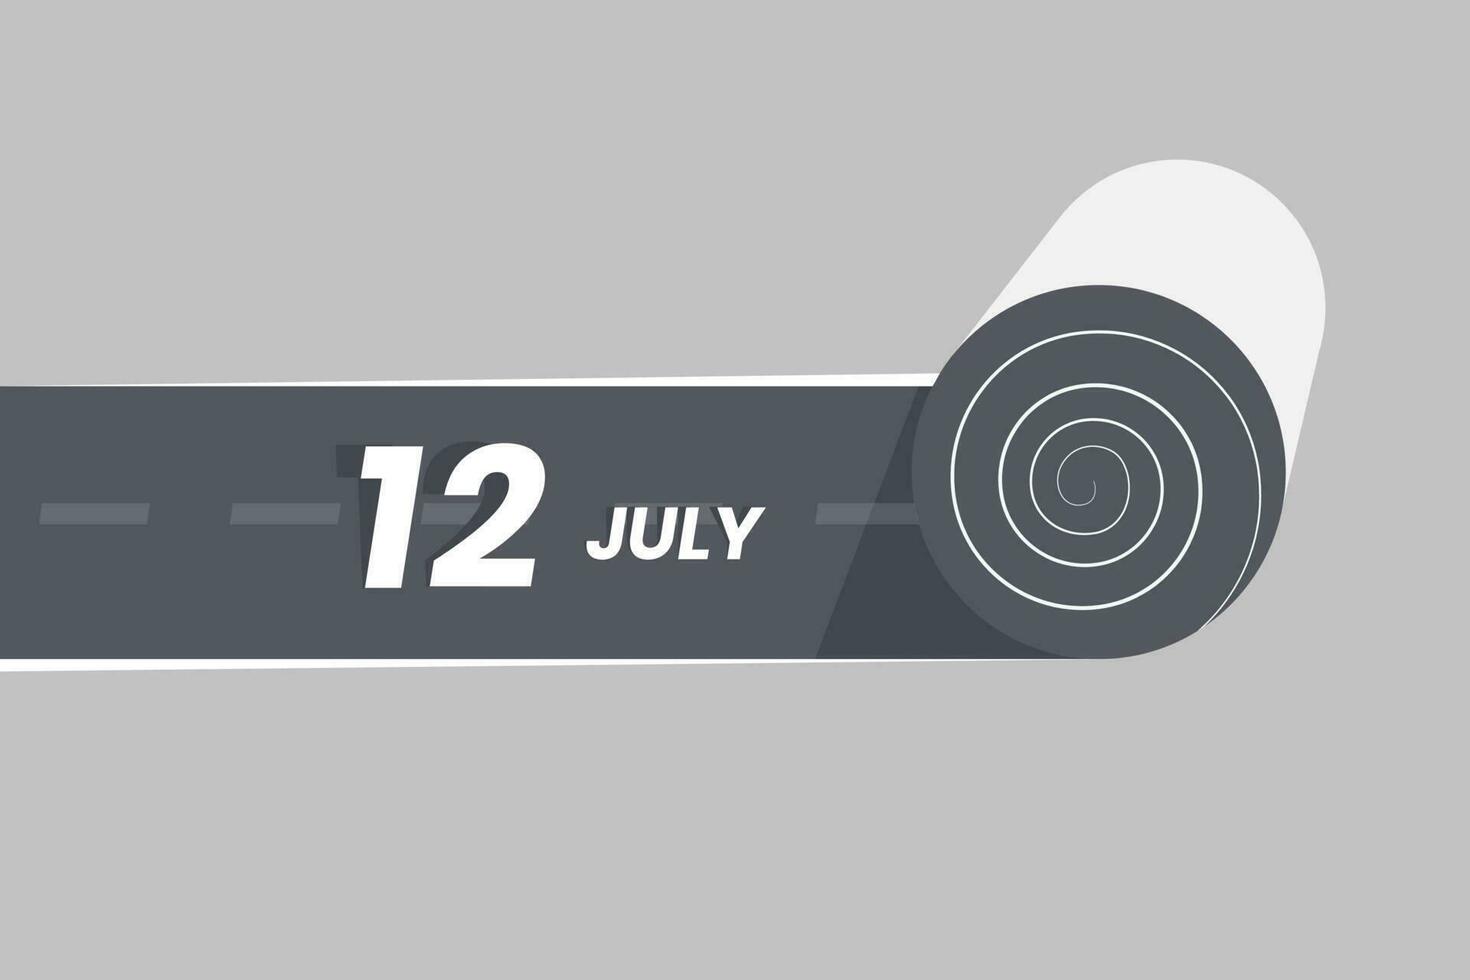 July 12 calendar icon rolling inside the road. 12 July Date Month icon vector illustrator.